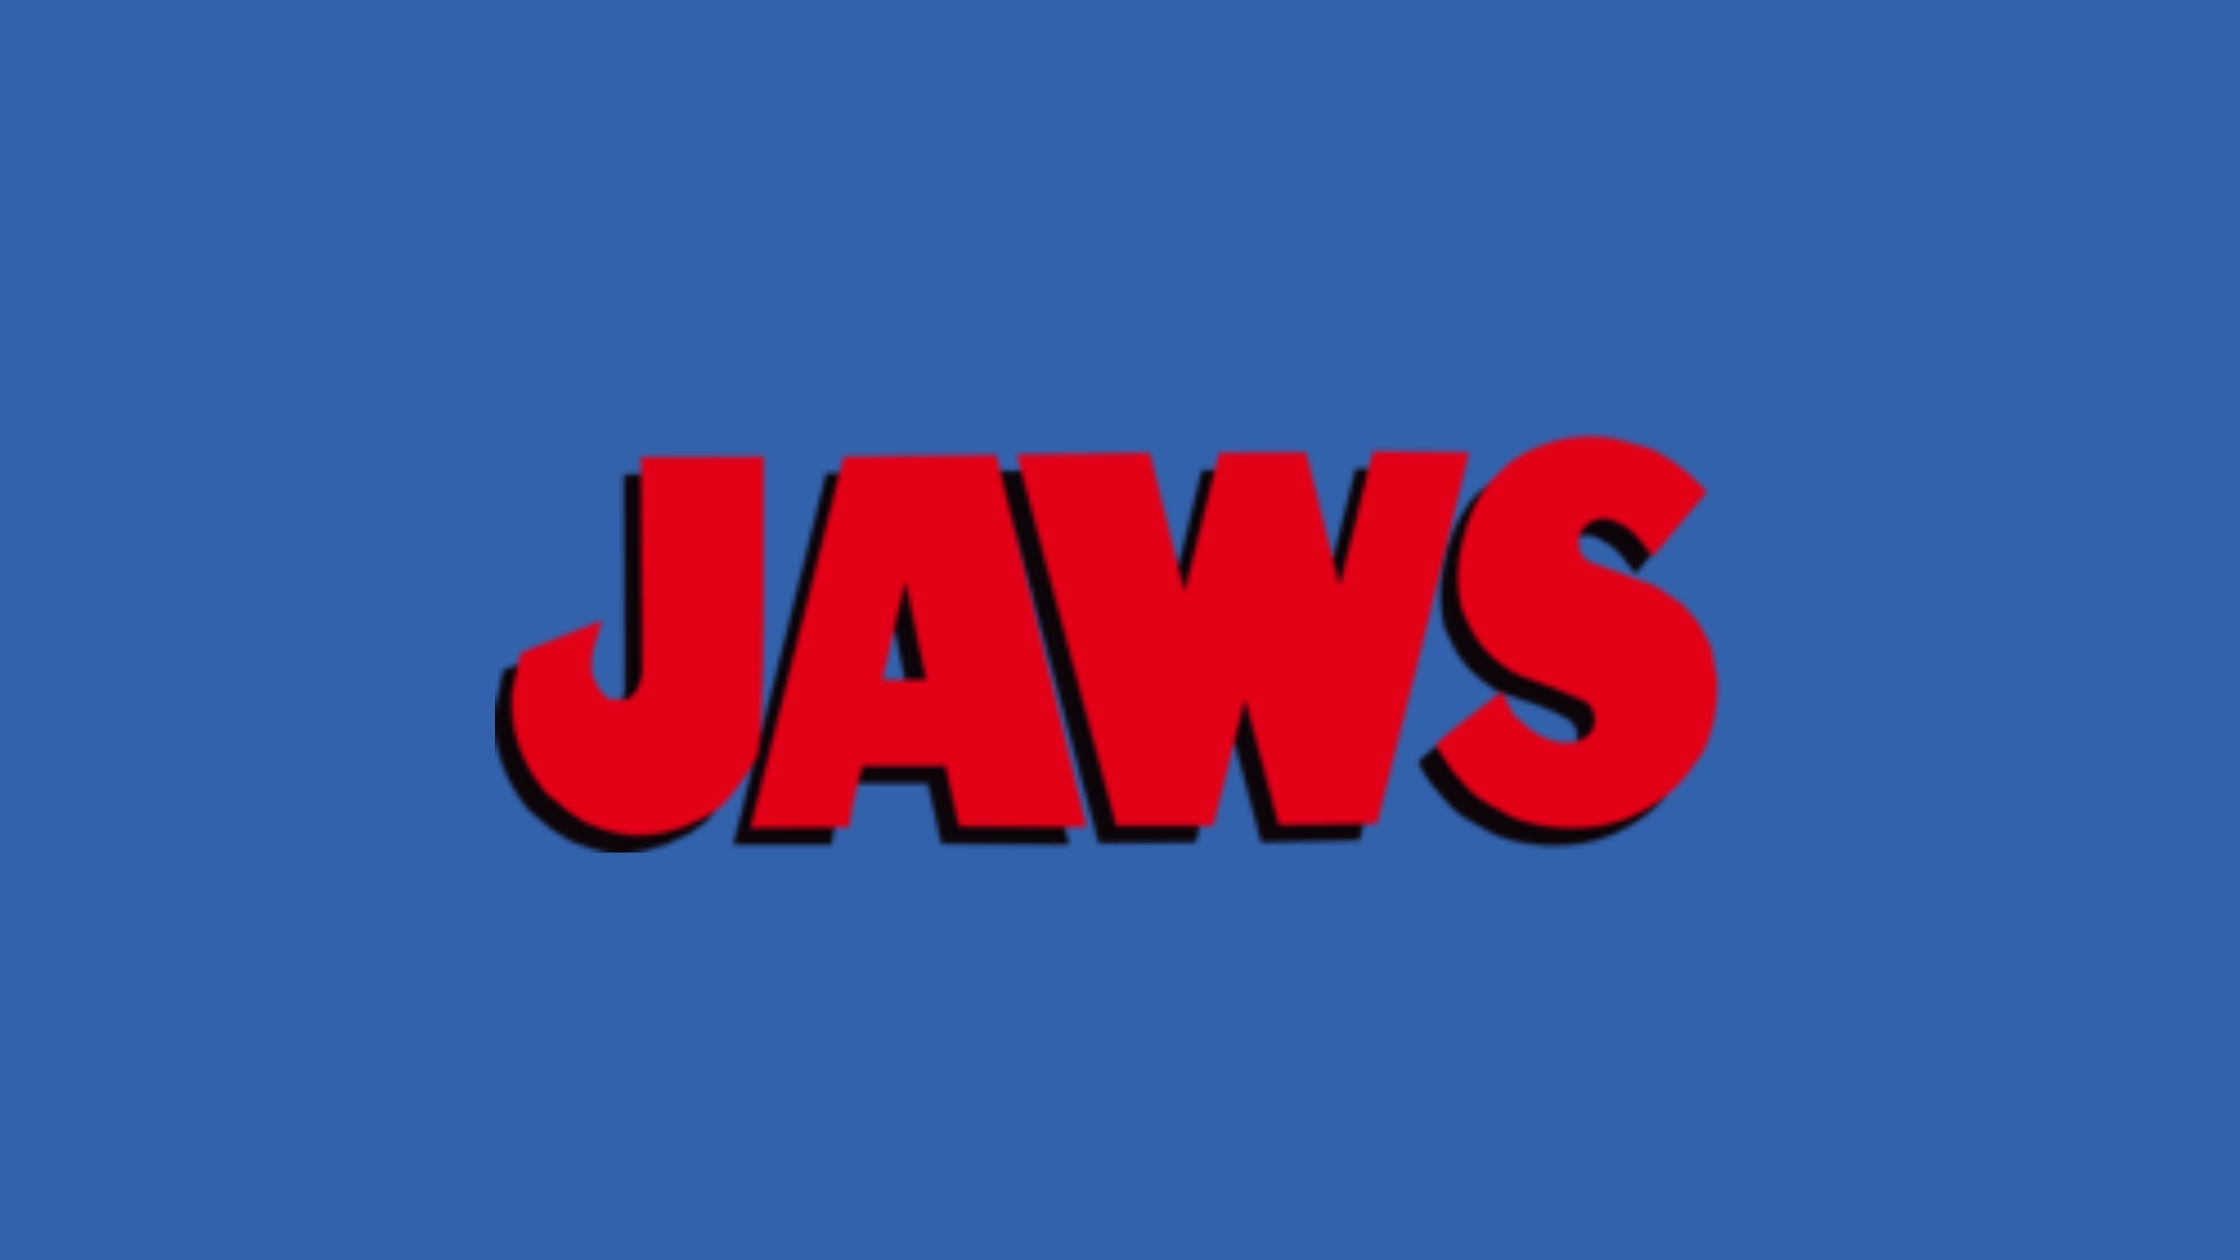 What Font Does Jaws Use?